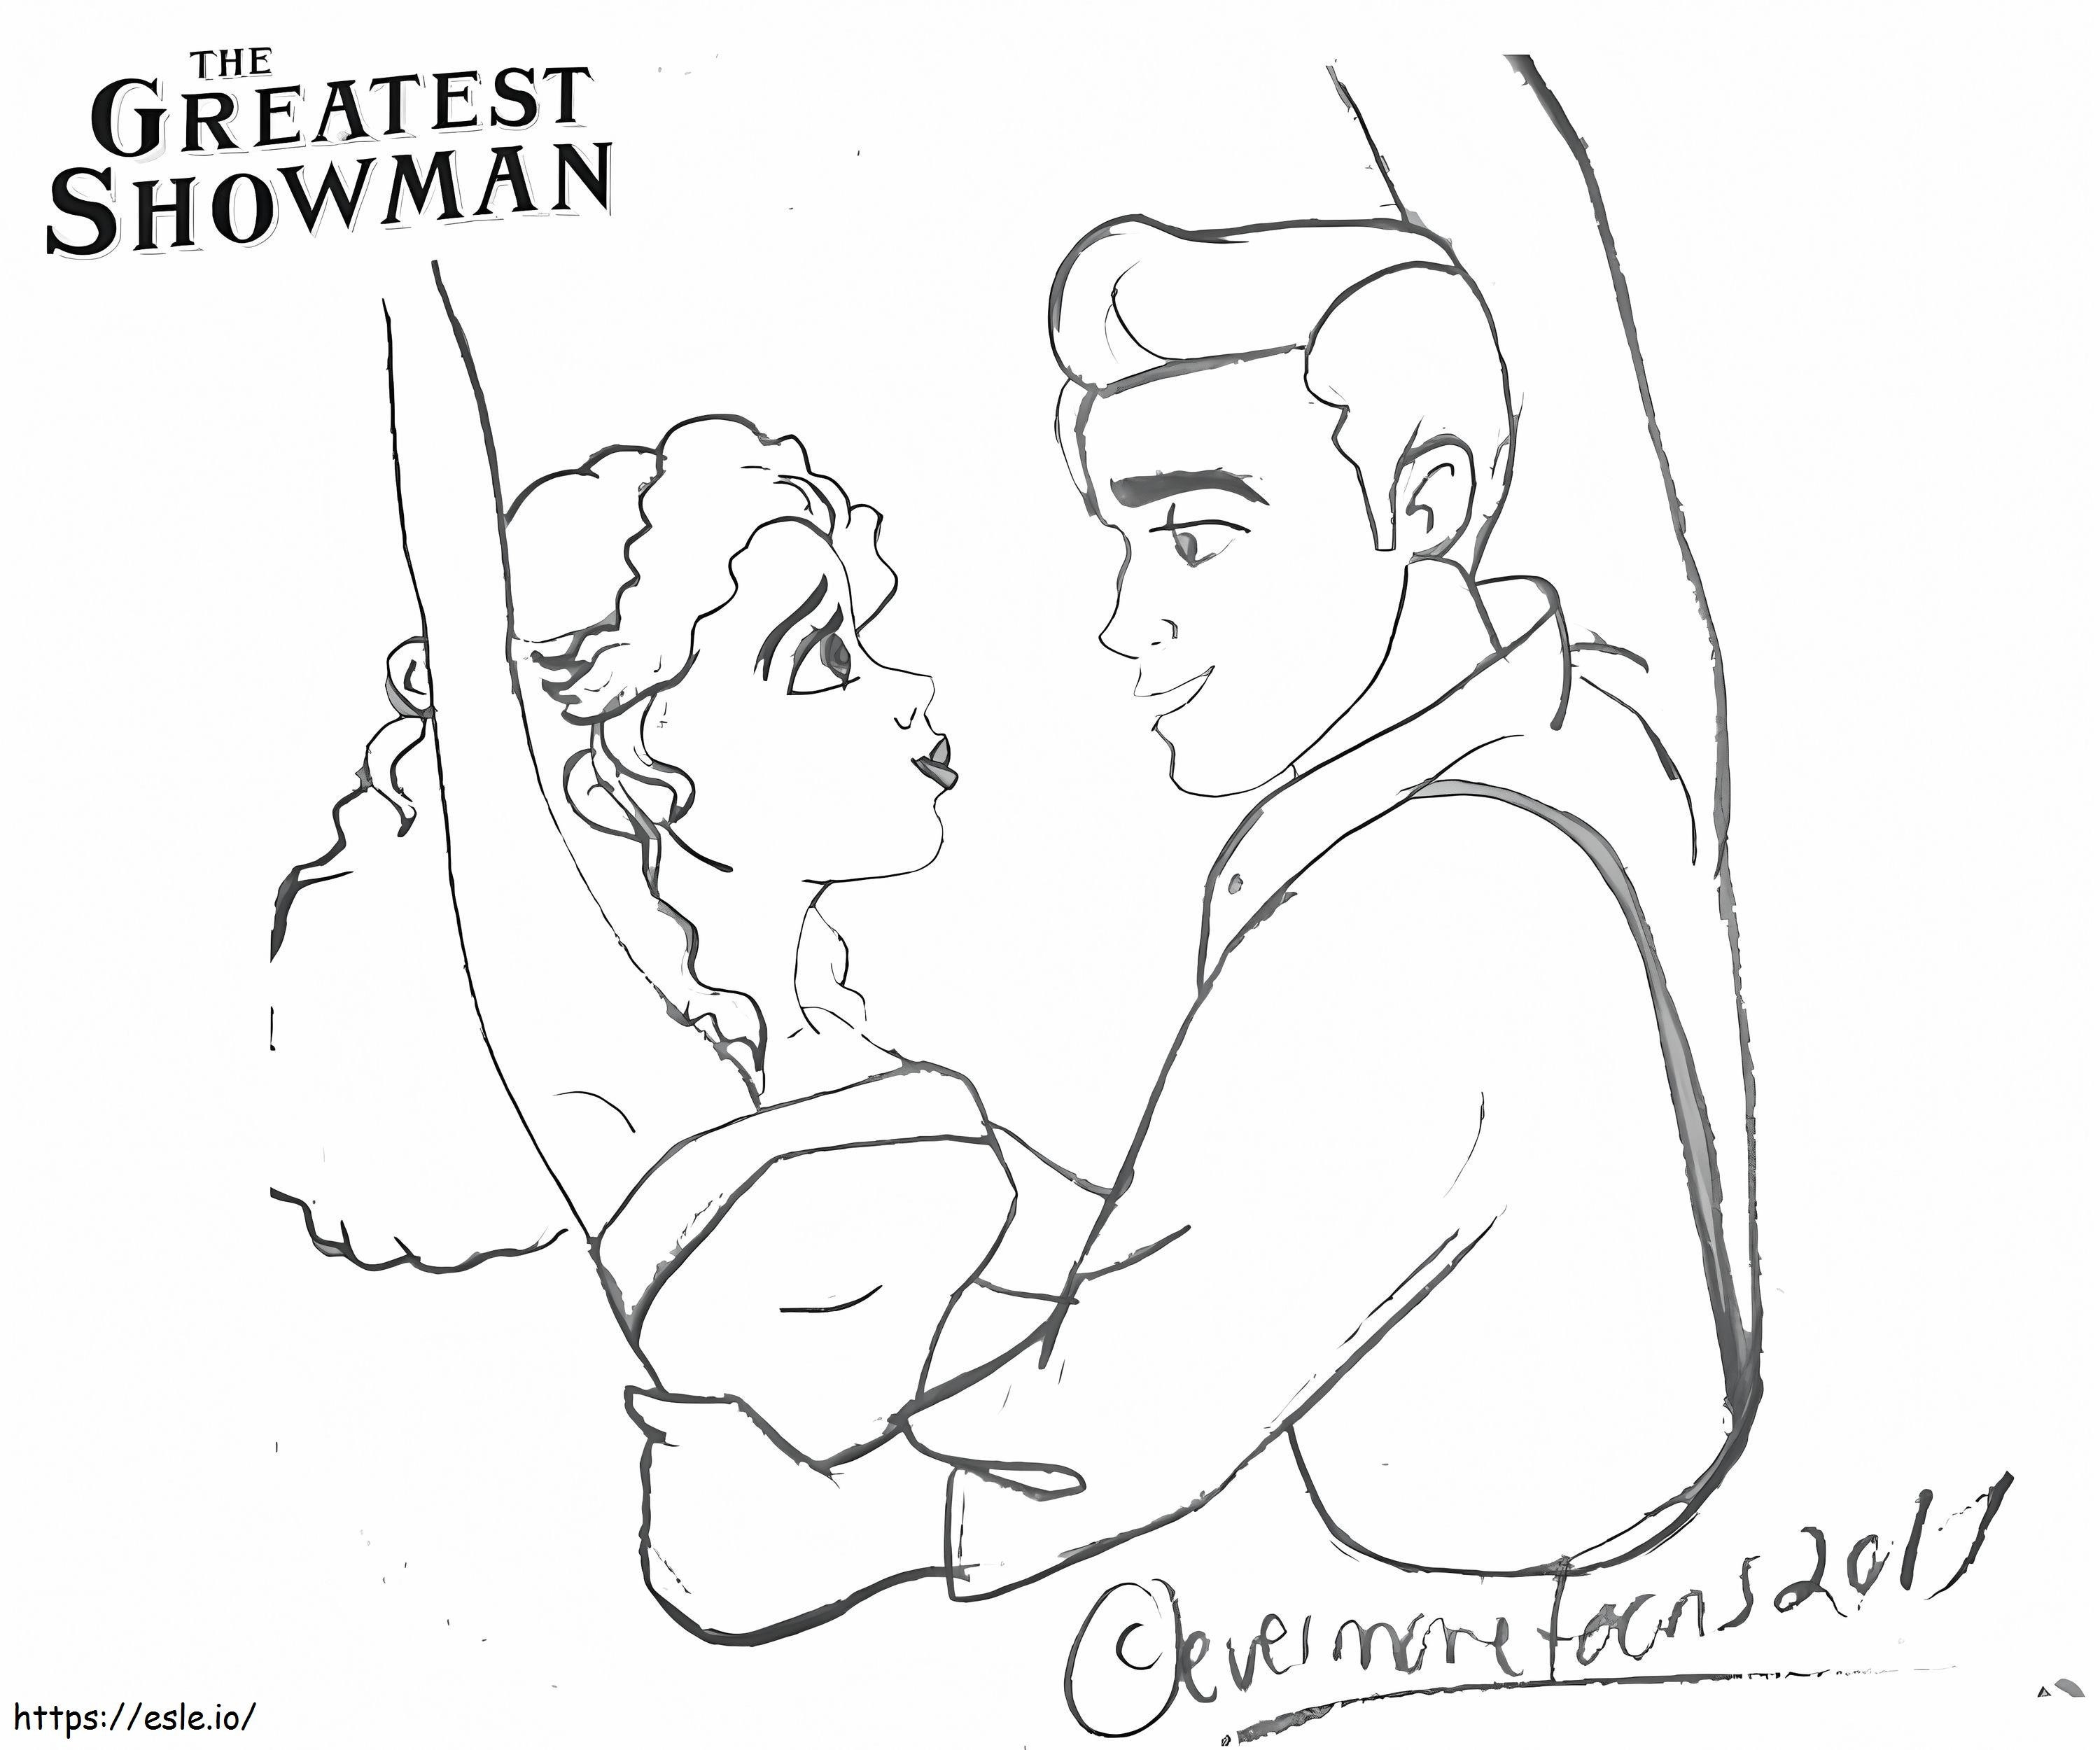 The Greatest Showman 1 coloring page